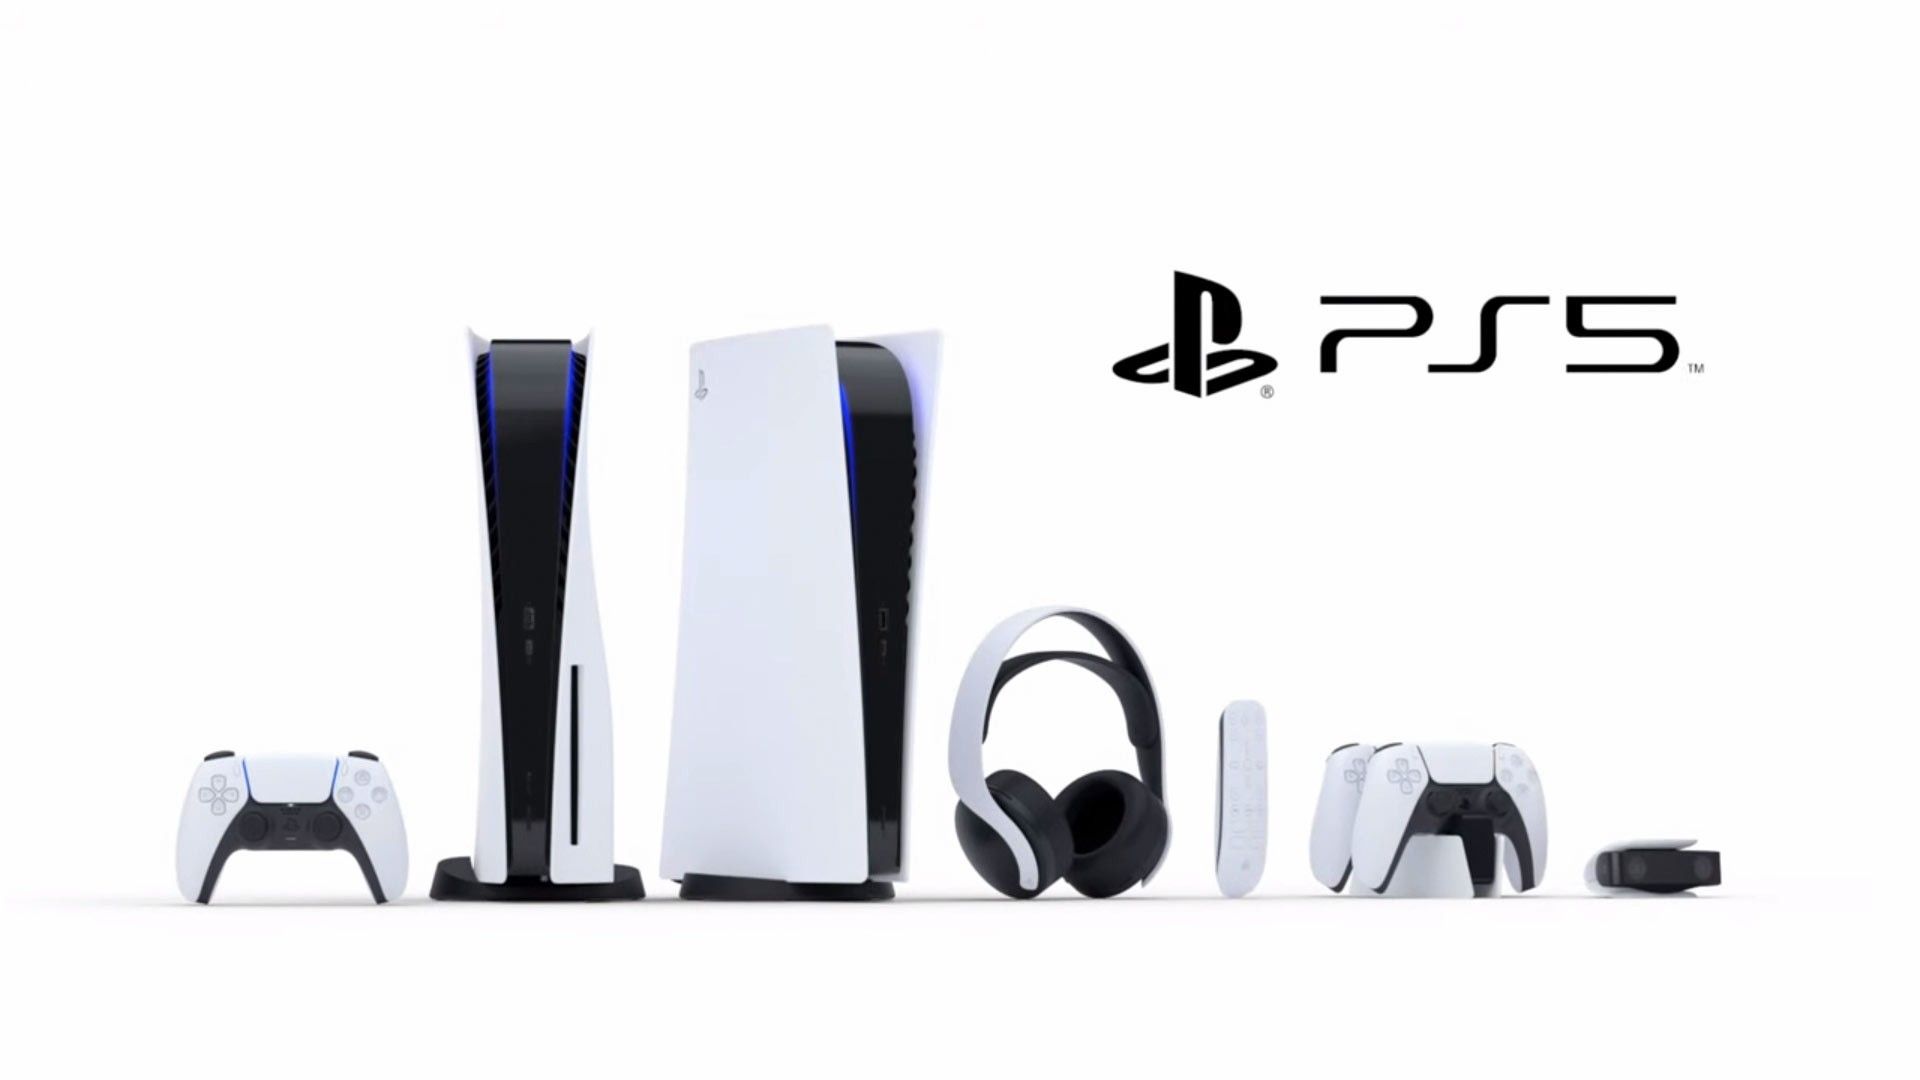 PlayStation 5 Console Image